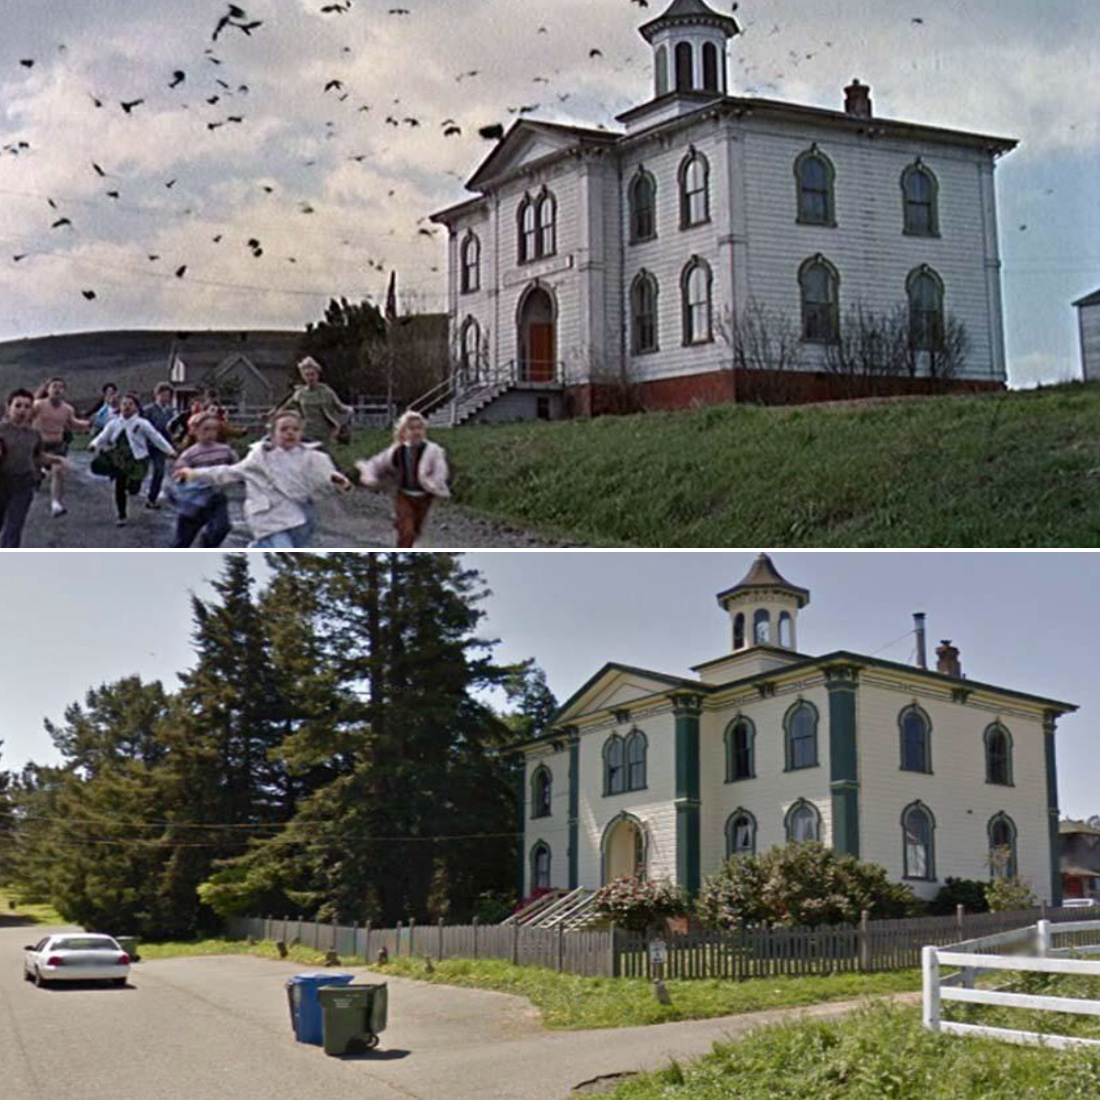 tag movie filming locations